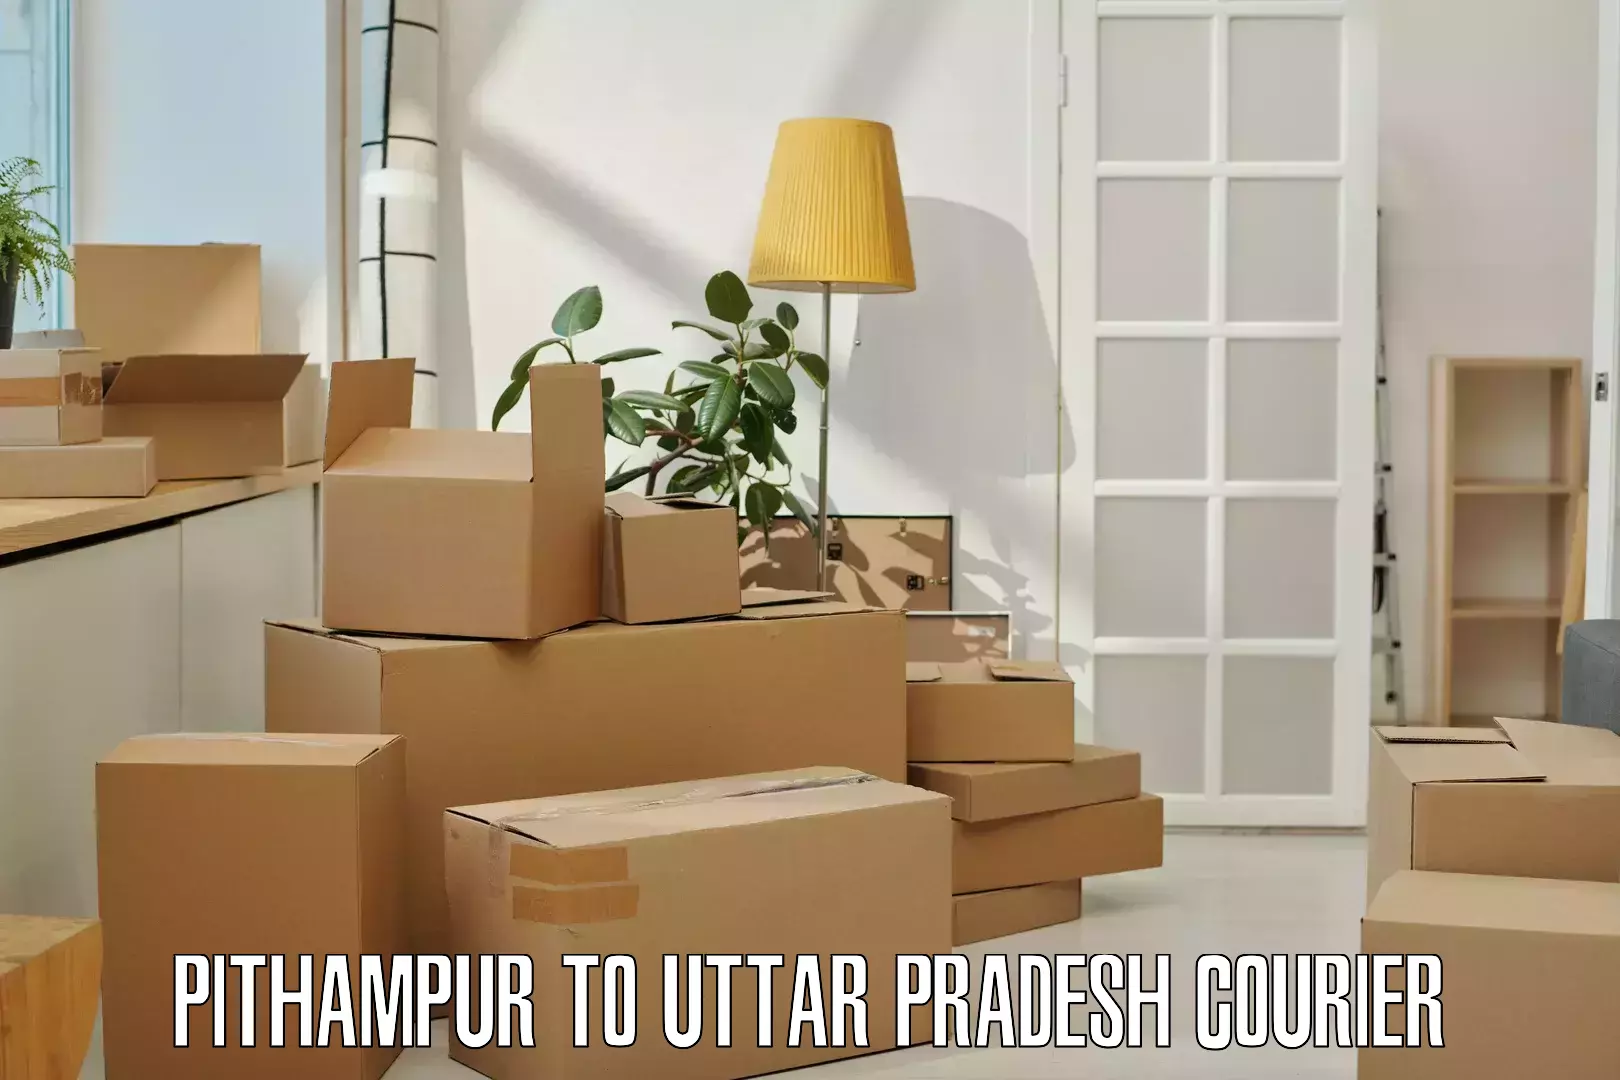 Reliable shipping partners Pithampur to Ghaziabad